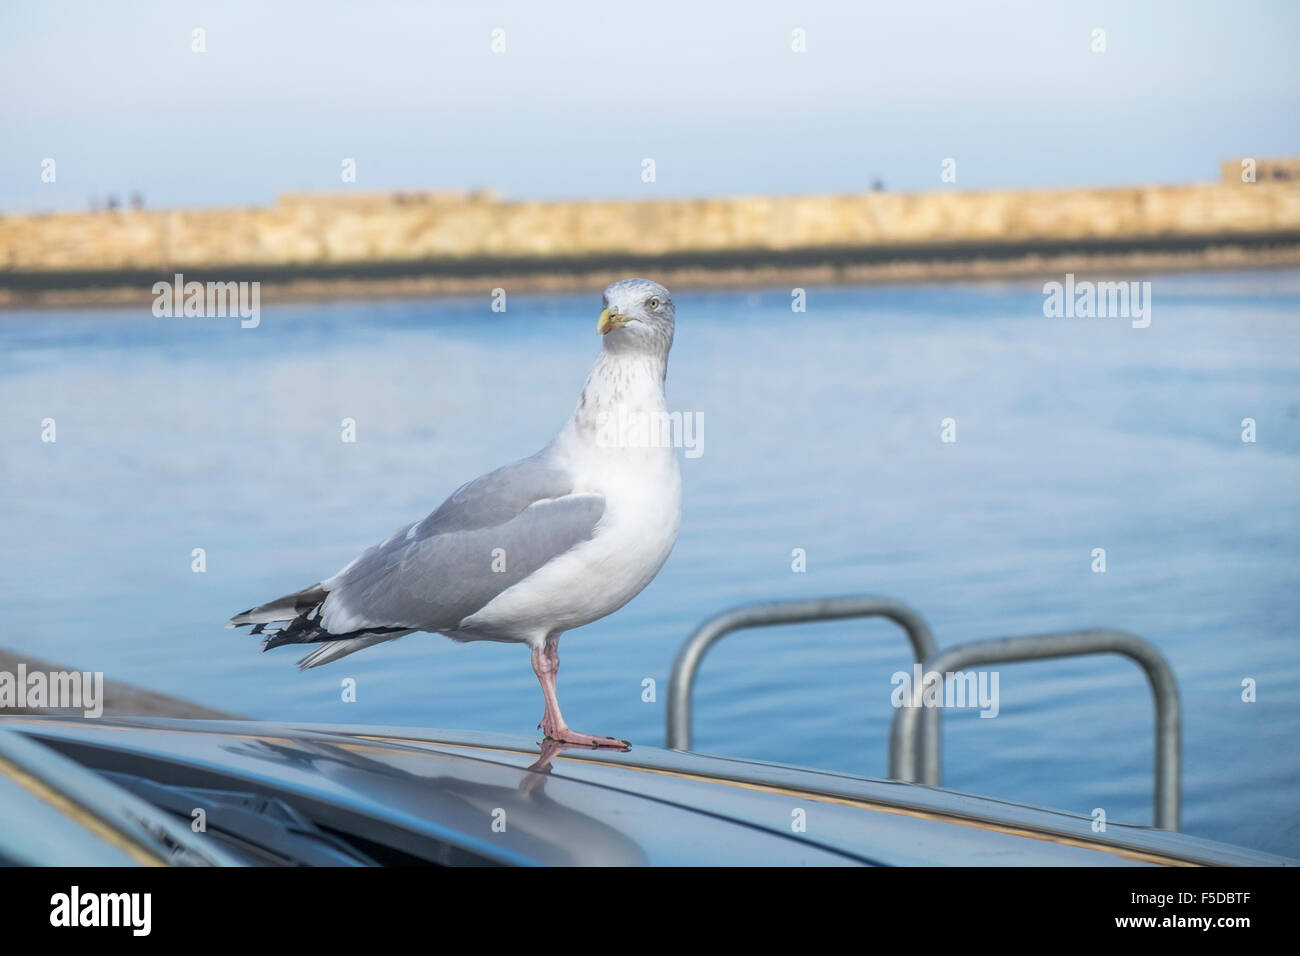 Gull standing on the hood or bonnet of a vehicle looking out to sea, Stock Photo